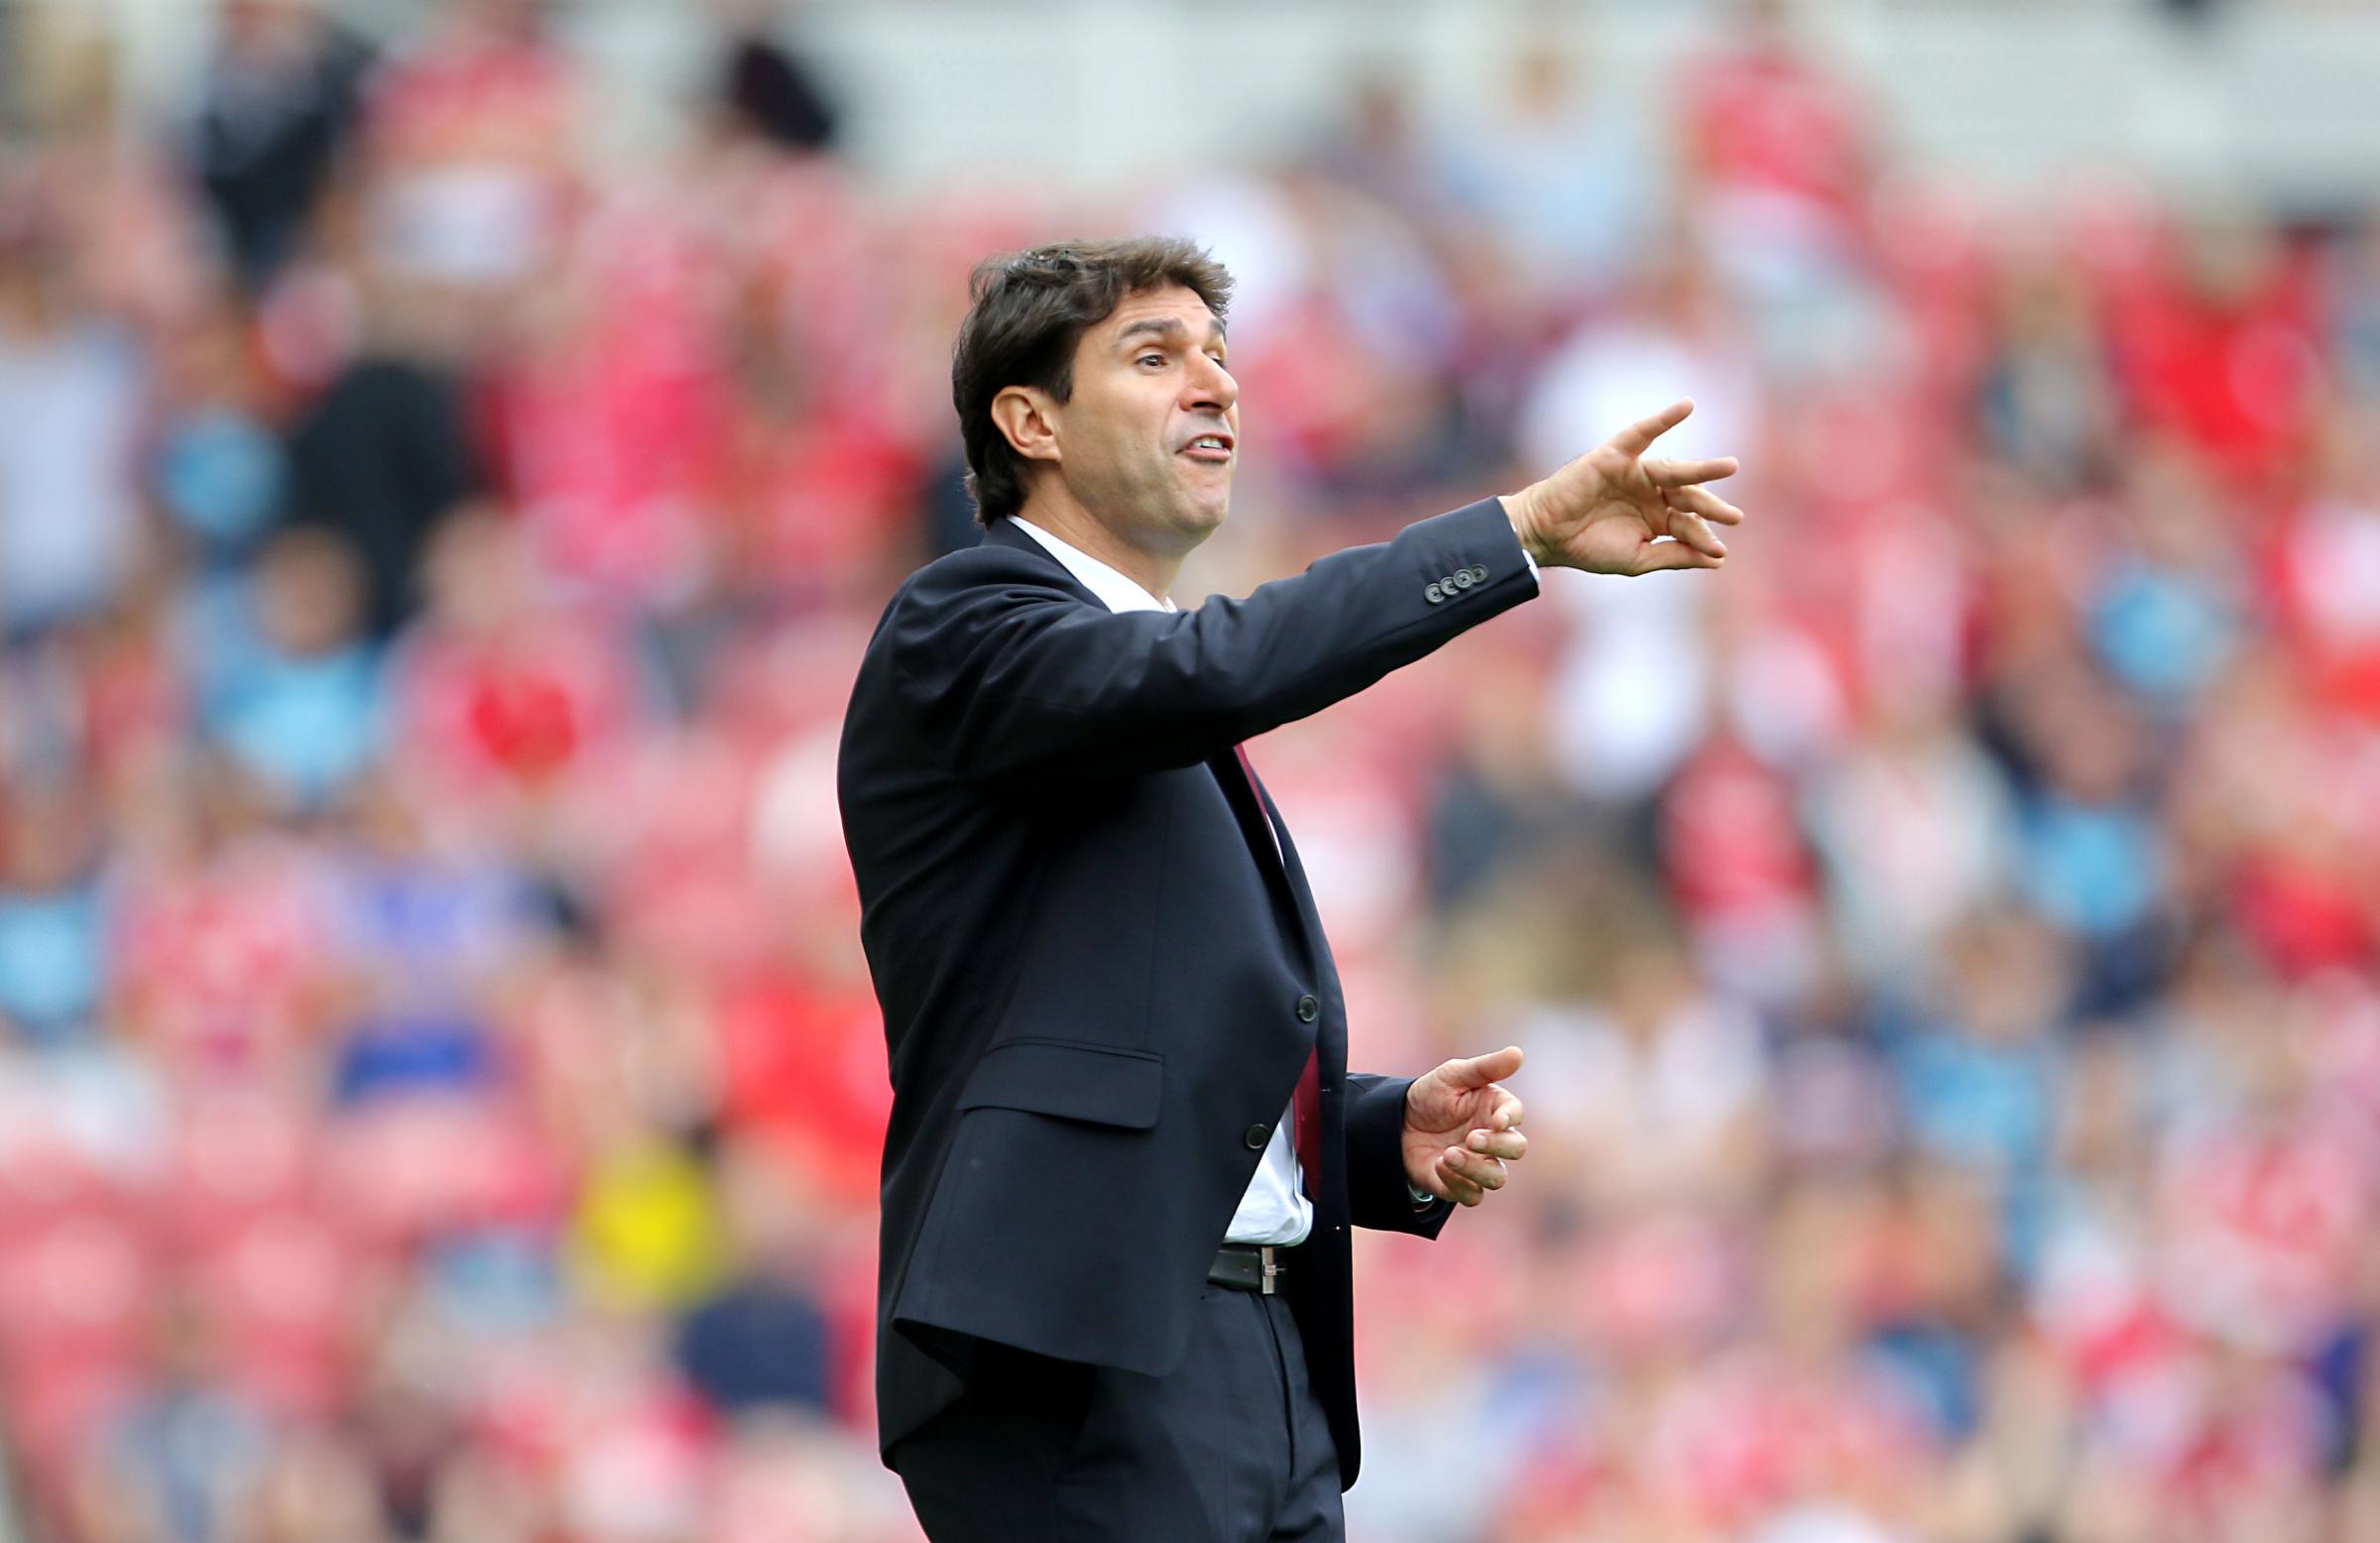 Middlesbrough boss spells out his tactical approach against Arsenal